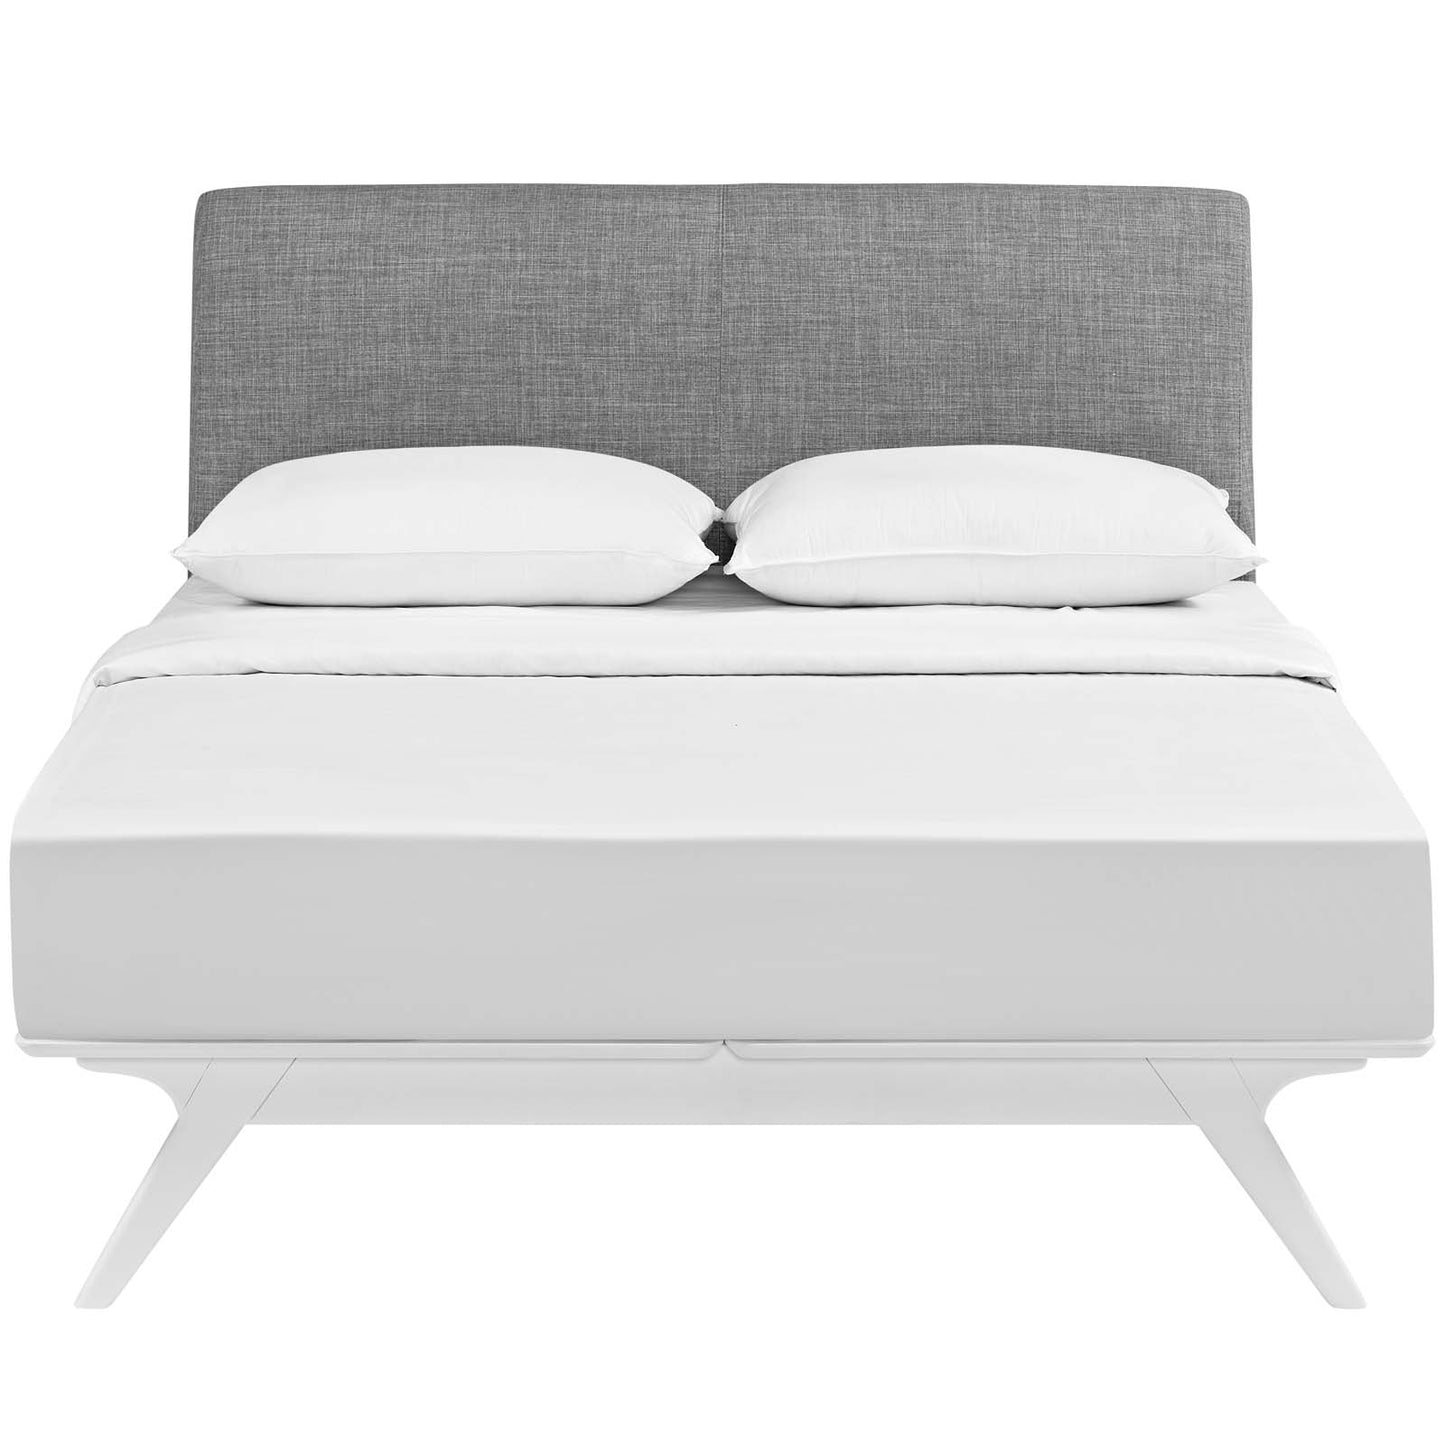 Tracy Full Bed White Gray MOD-5765-WHI-GRY